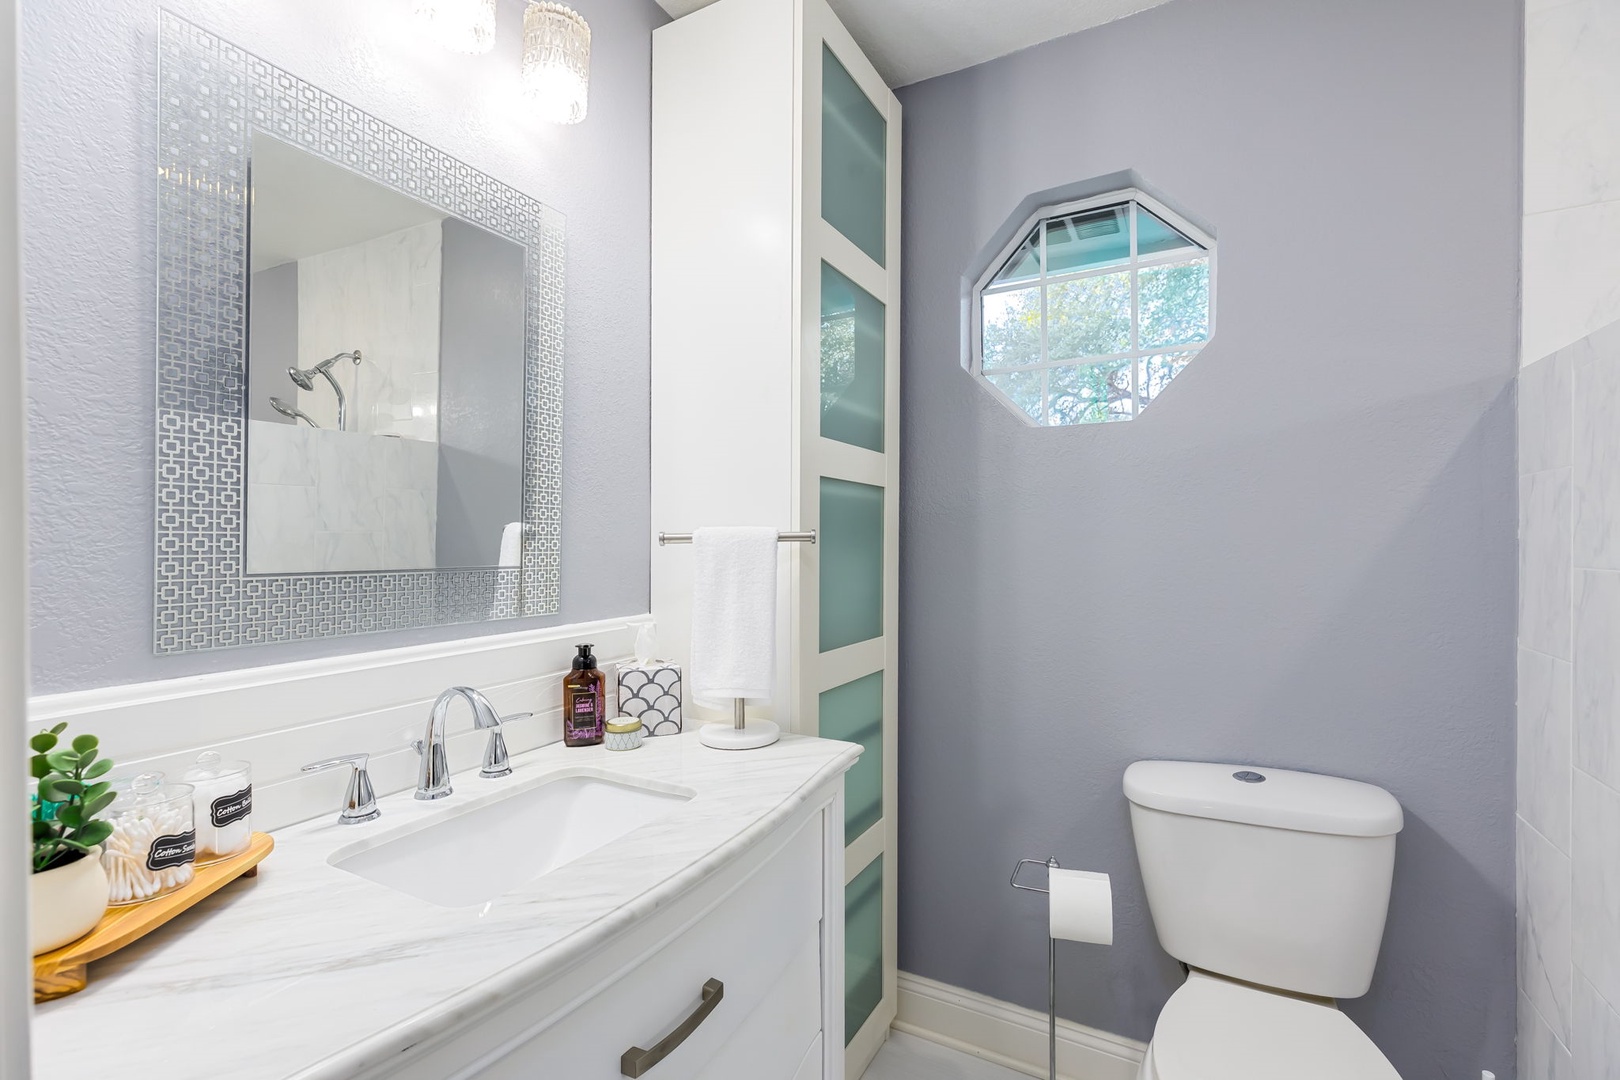 Private dual vanity areas & a glass walk-in shower await in this Jack & Jill bath